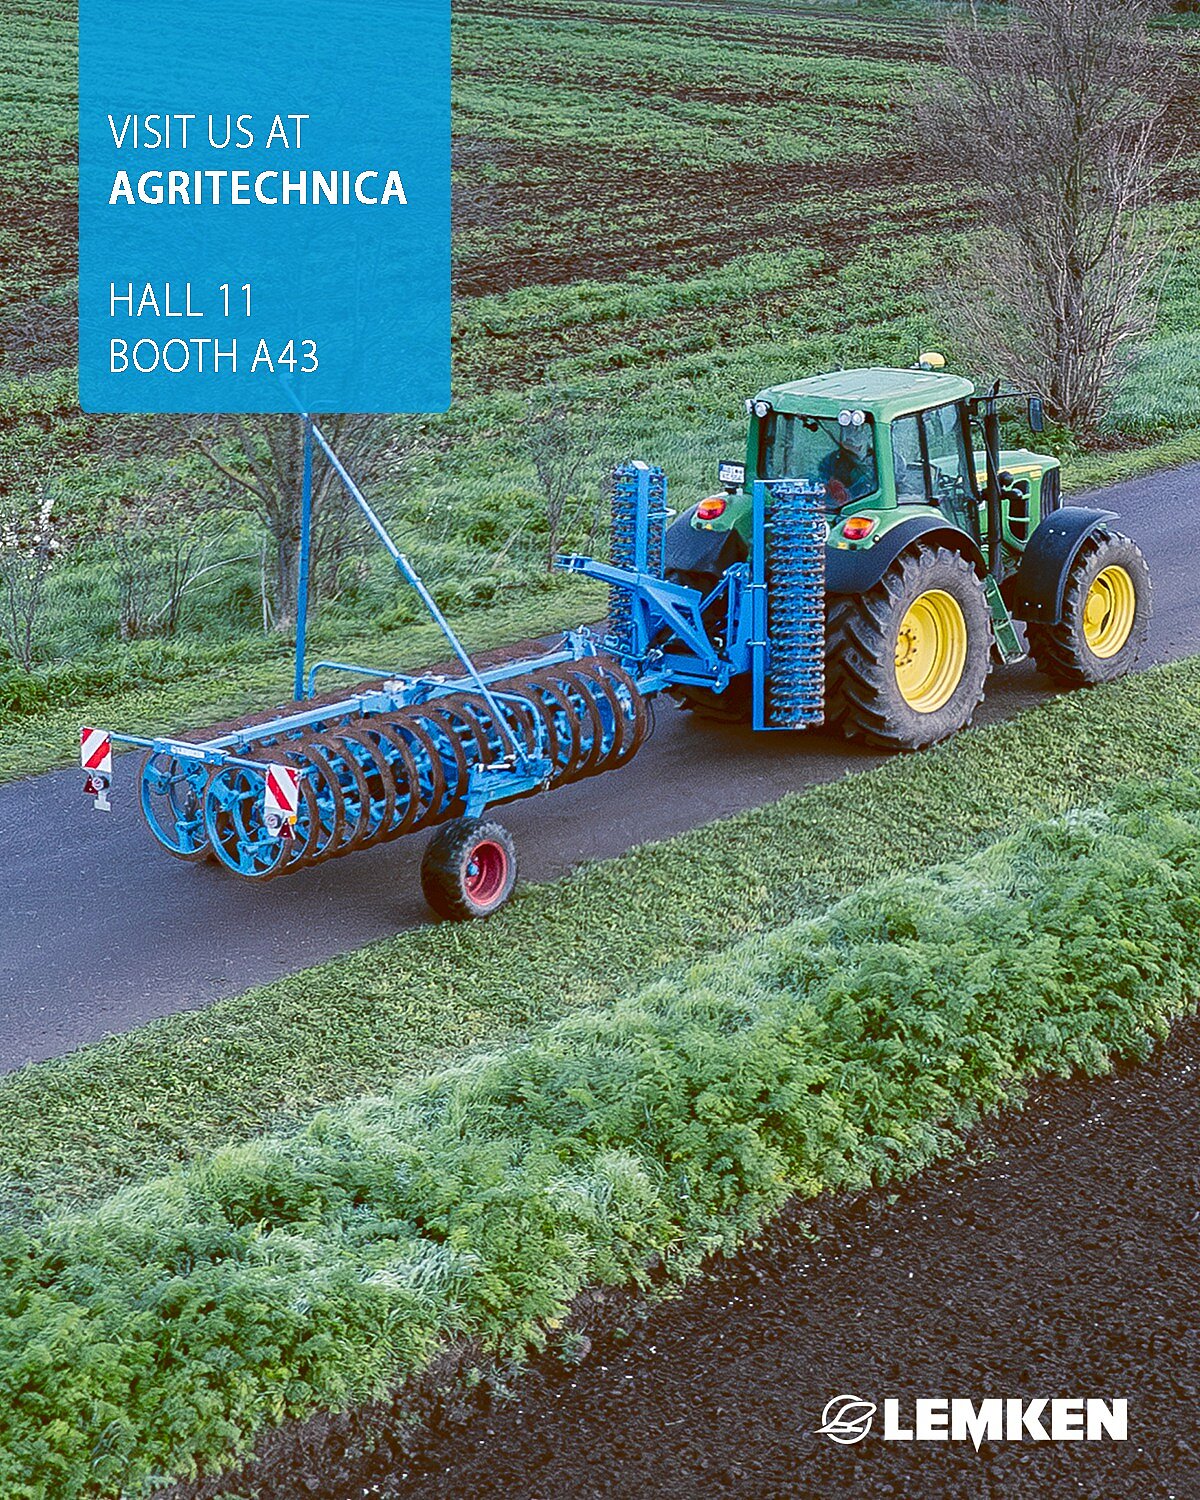 🌾 New at Agritechnica: Our VarioPack furrow press, with a working width of over 3 m, has EU type approval for road...